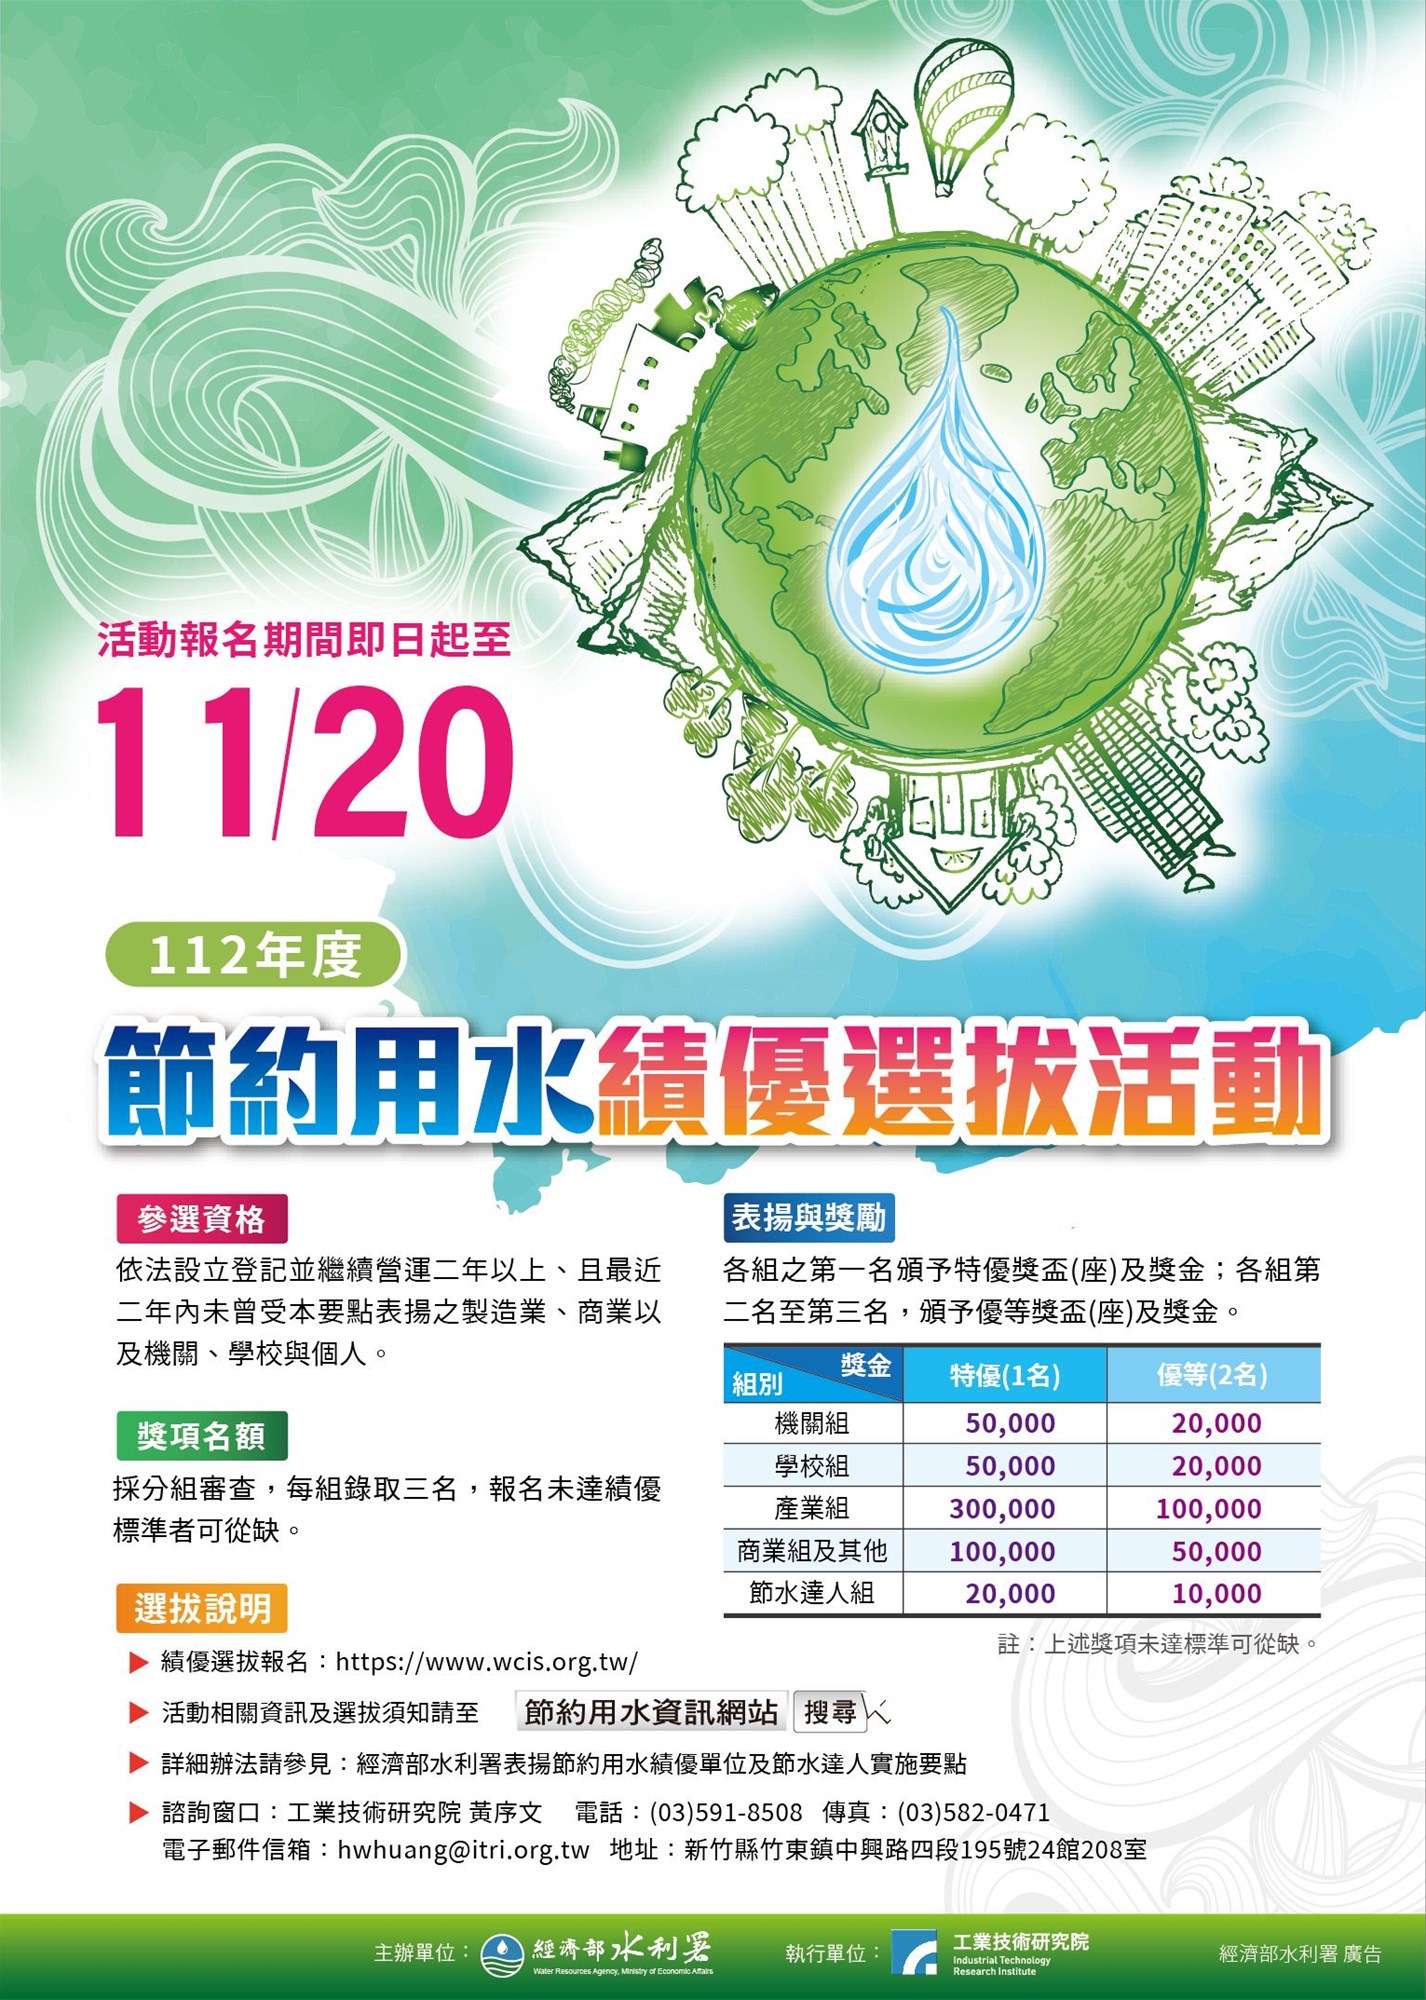 112th Water Conservancy Department of the Ministry of Economic Affairs’ Water Conservation Performance Excellence and Selection Activity